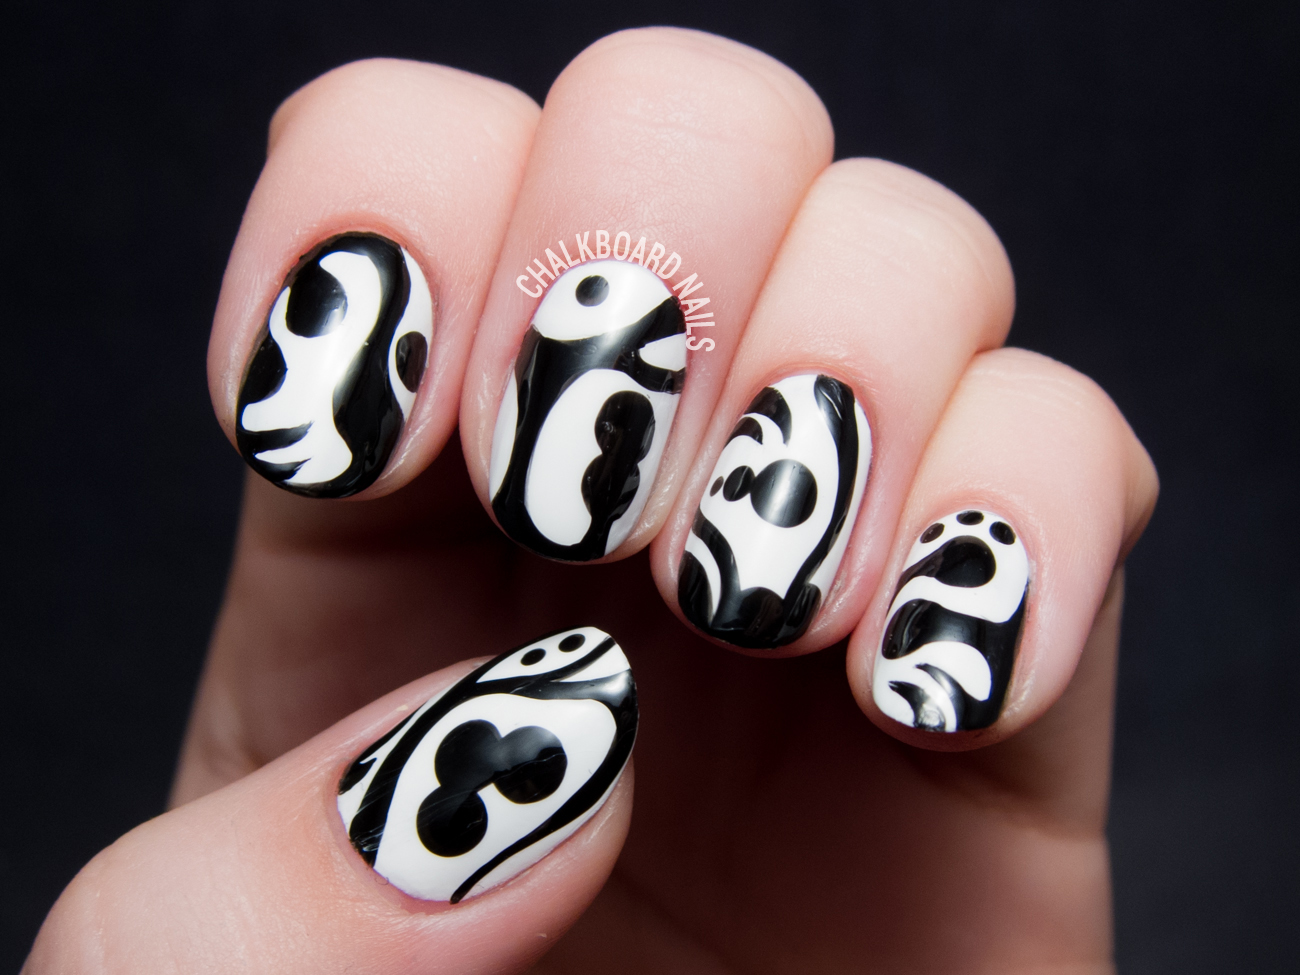 Black and white nails by @chalkboardnails